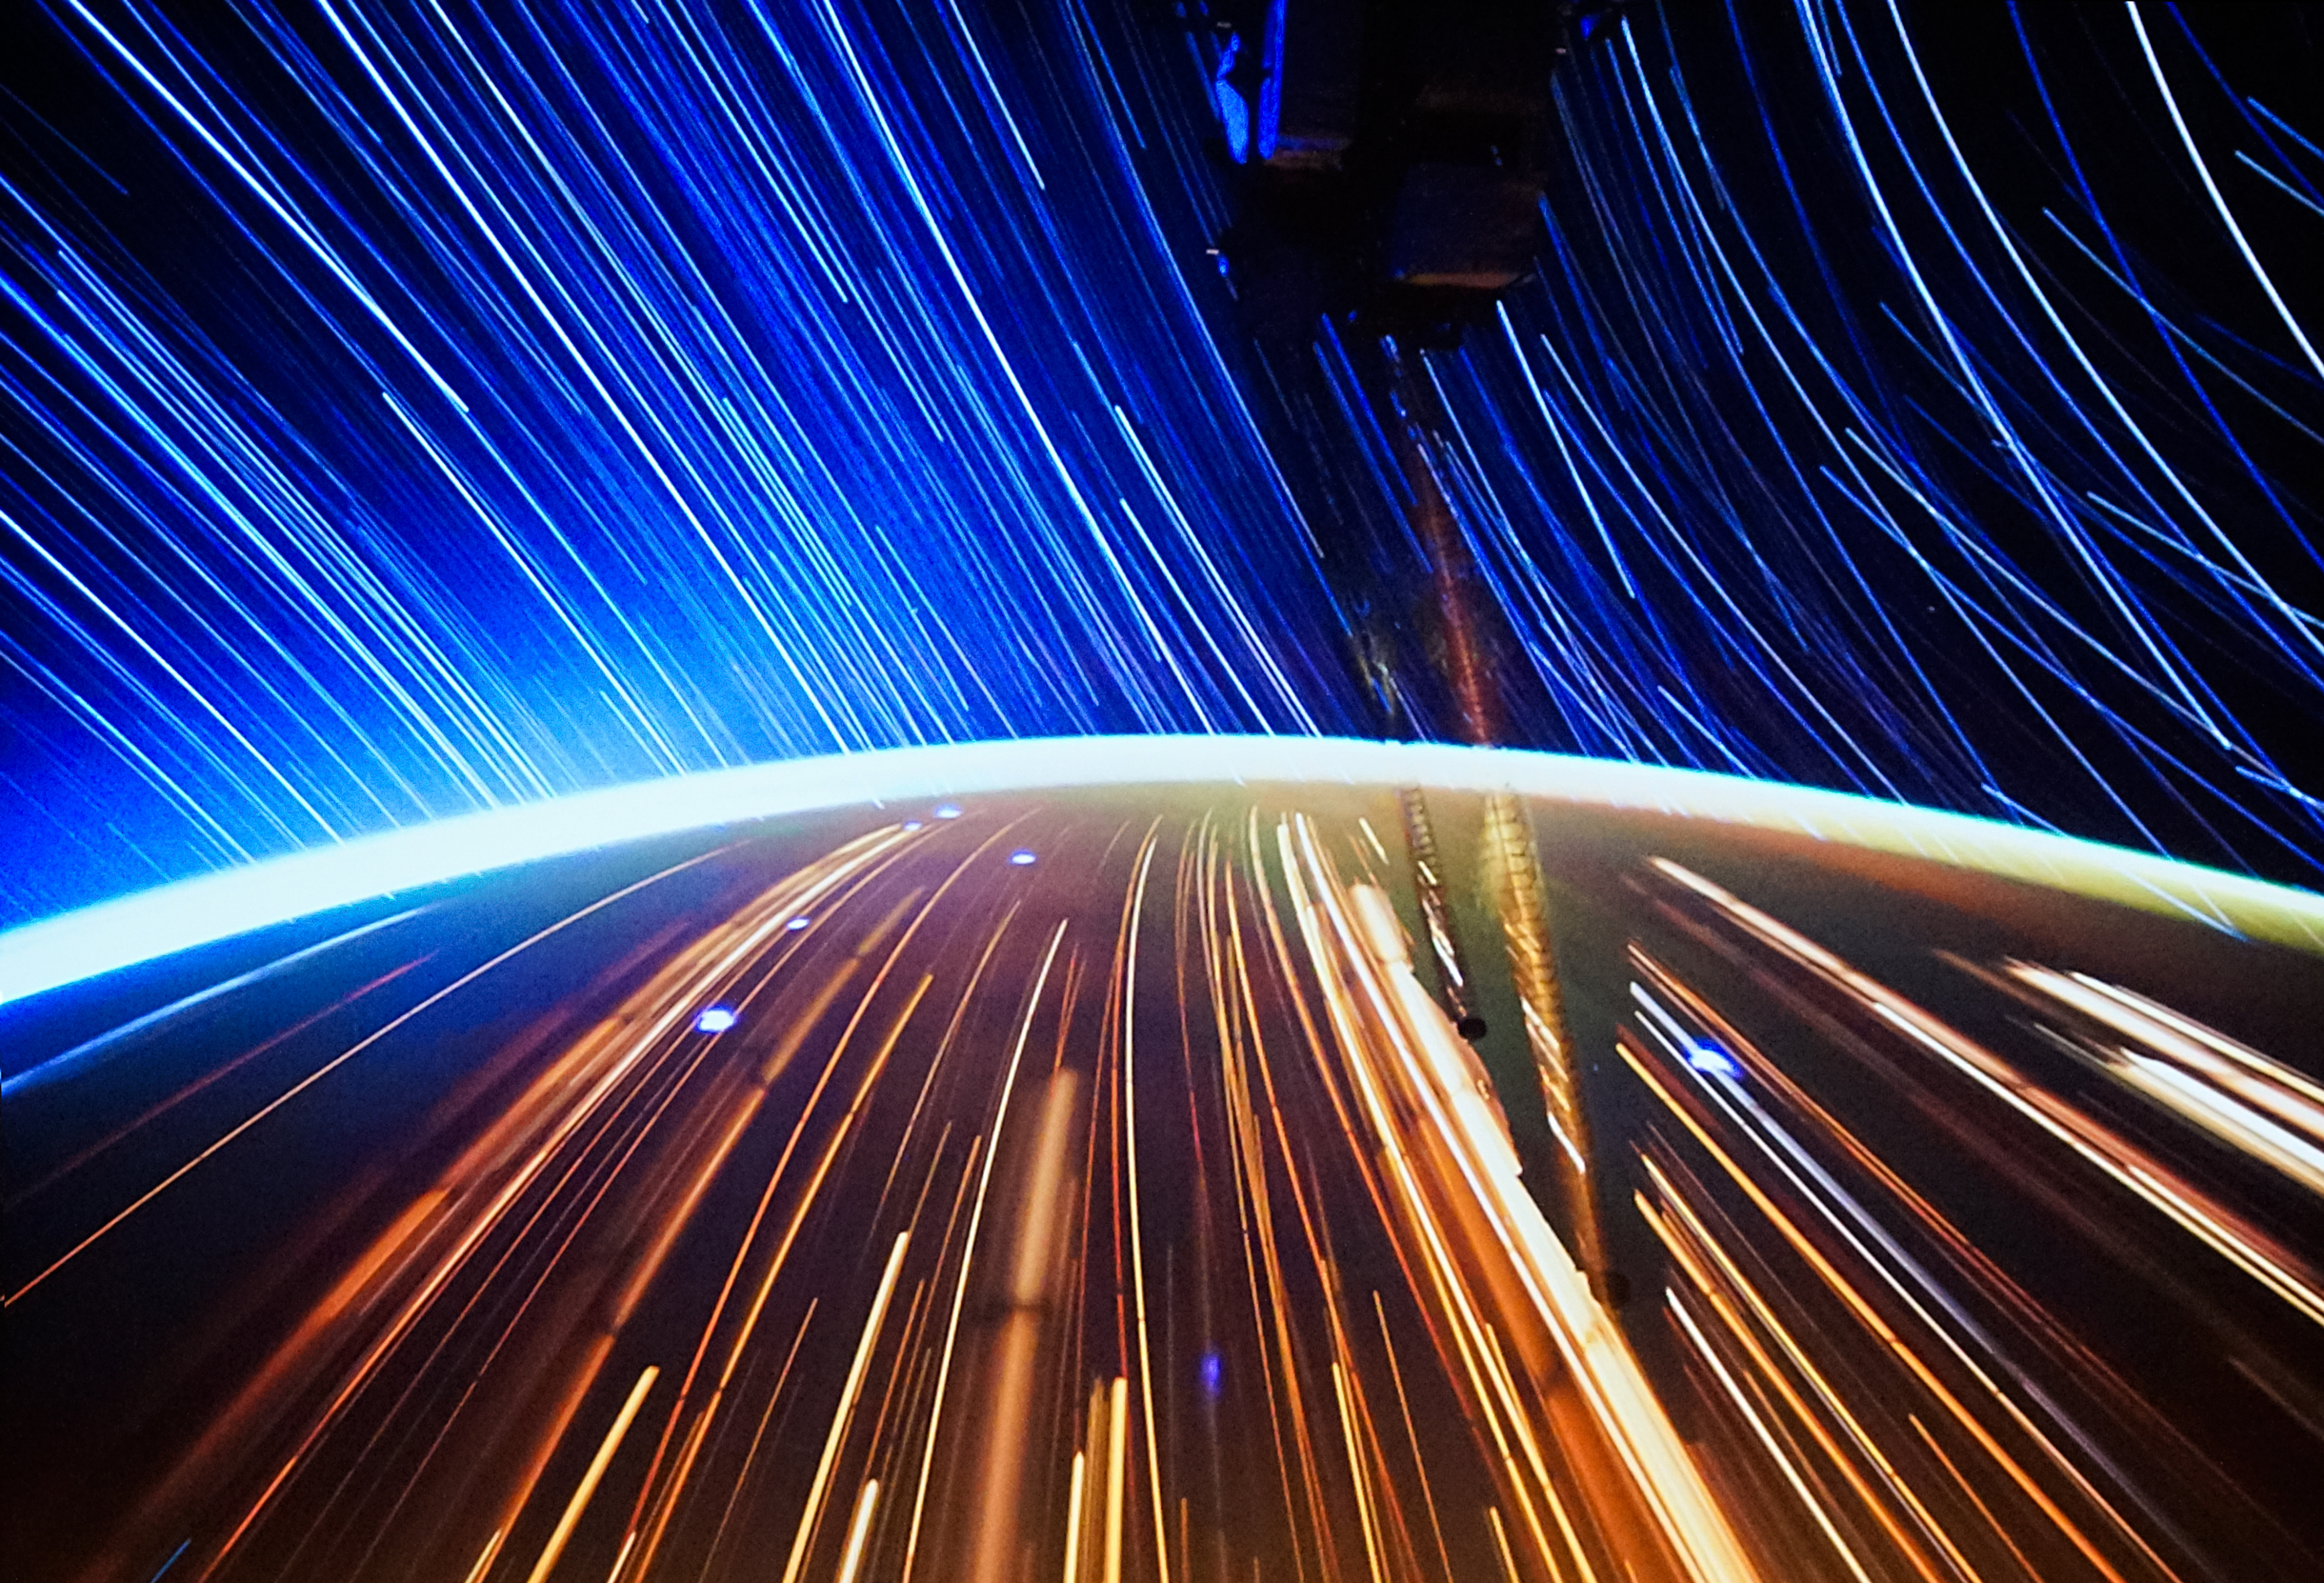 SXSW 2015: An Astronaut’s Guide To Better Space Photos